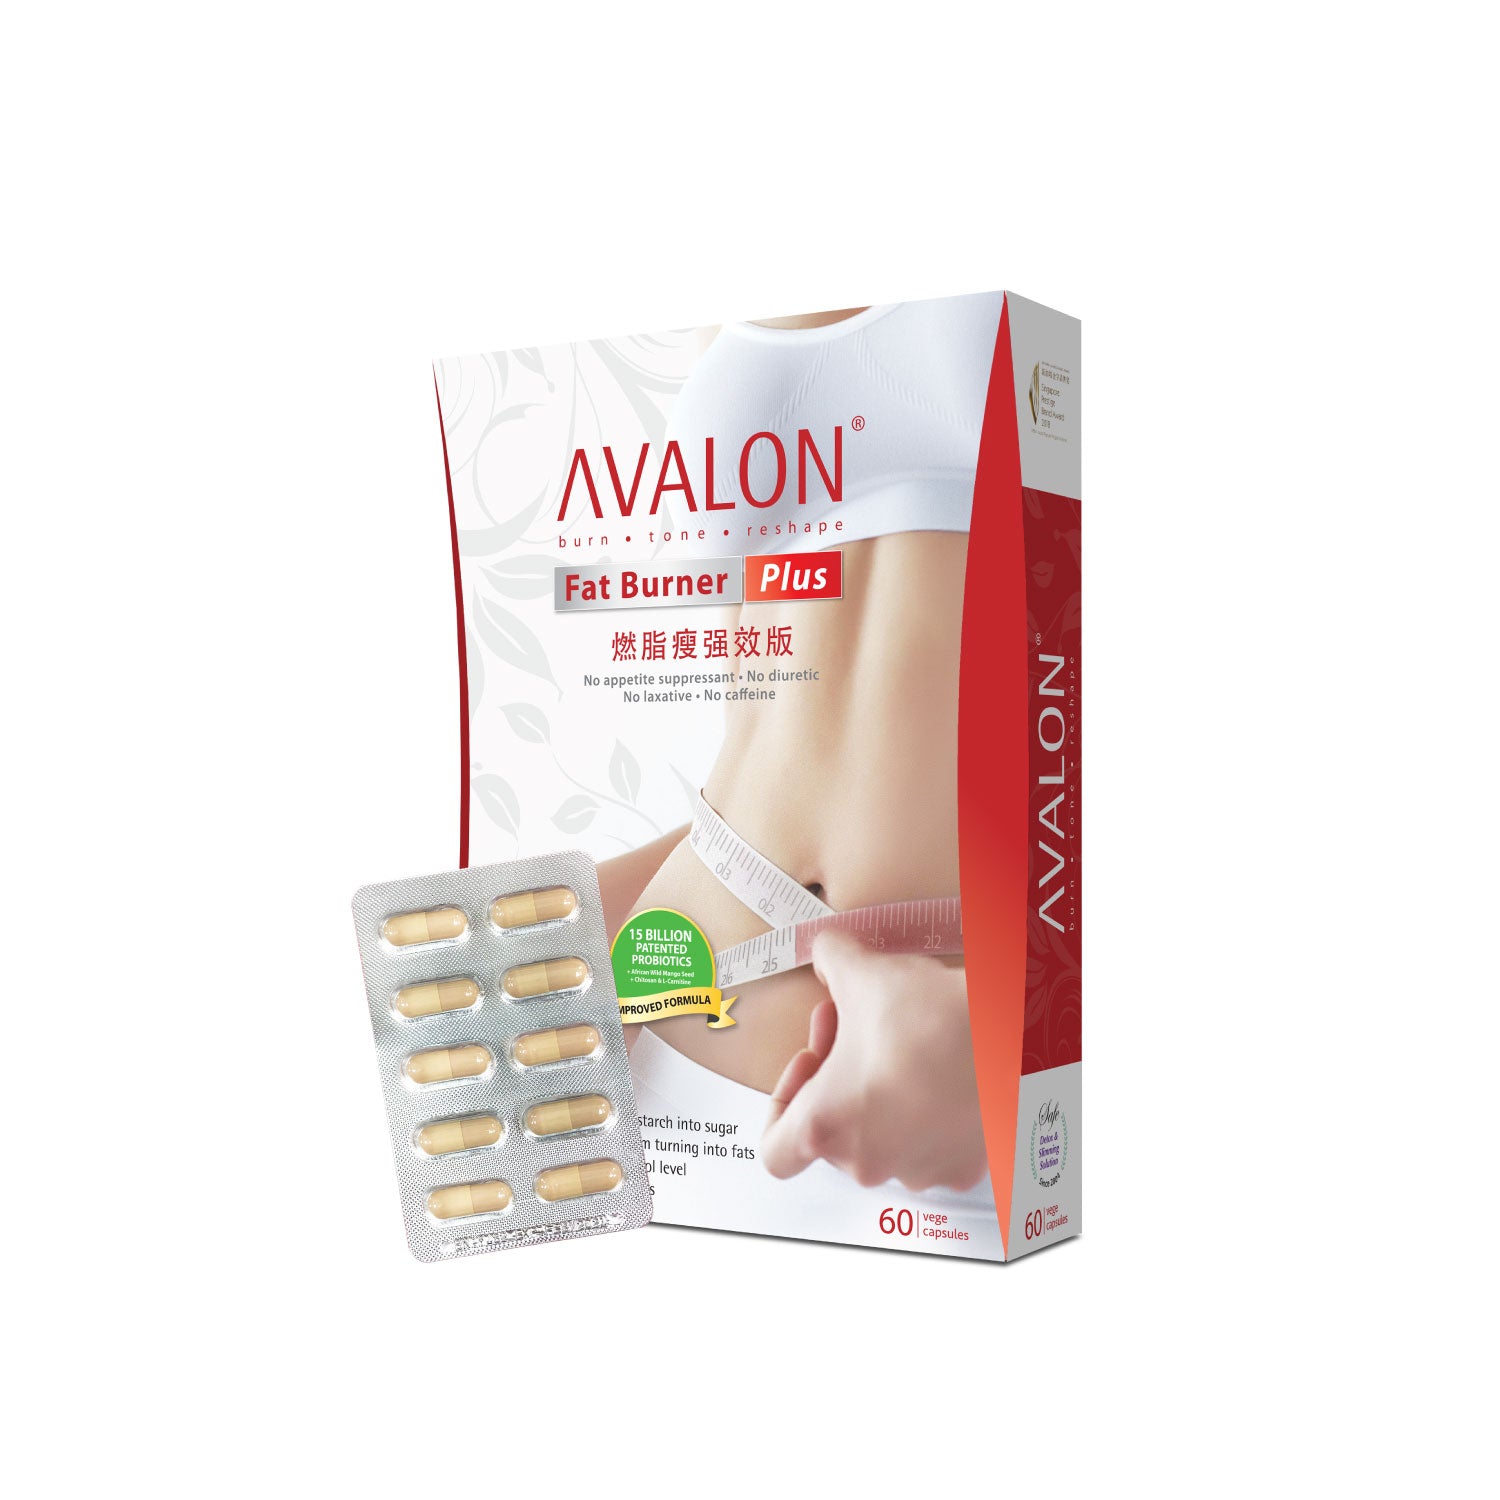 AVALON® Fat Burner Plus contains 5X stronger burning effect - 24/7 non-stop! It helps to burn excess fats, increase metabolism, prevent carbs breakdown and fat absorption, maintain healthy cholesterol level and liver health. It contains 100% natural ingredients - curcumin, piperine, water soluble dietary fiber, decaffeinated green tea extract. No harmful substances and most importantly, no weight rebound.